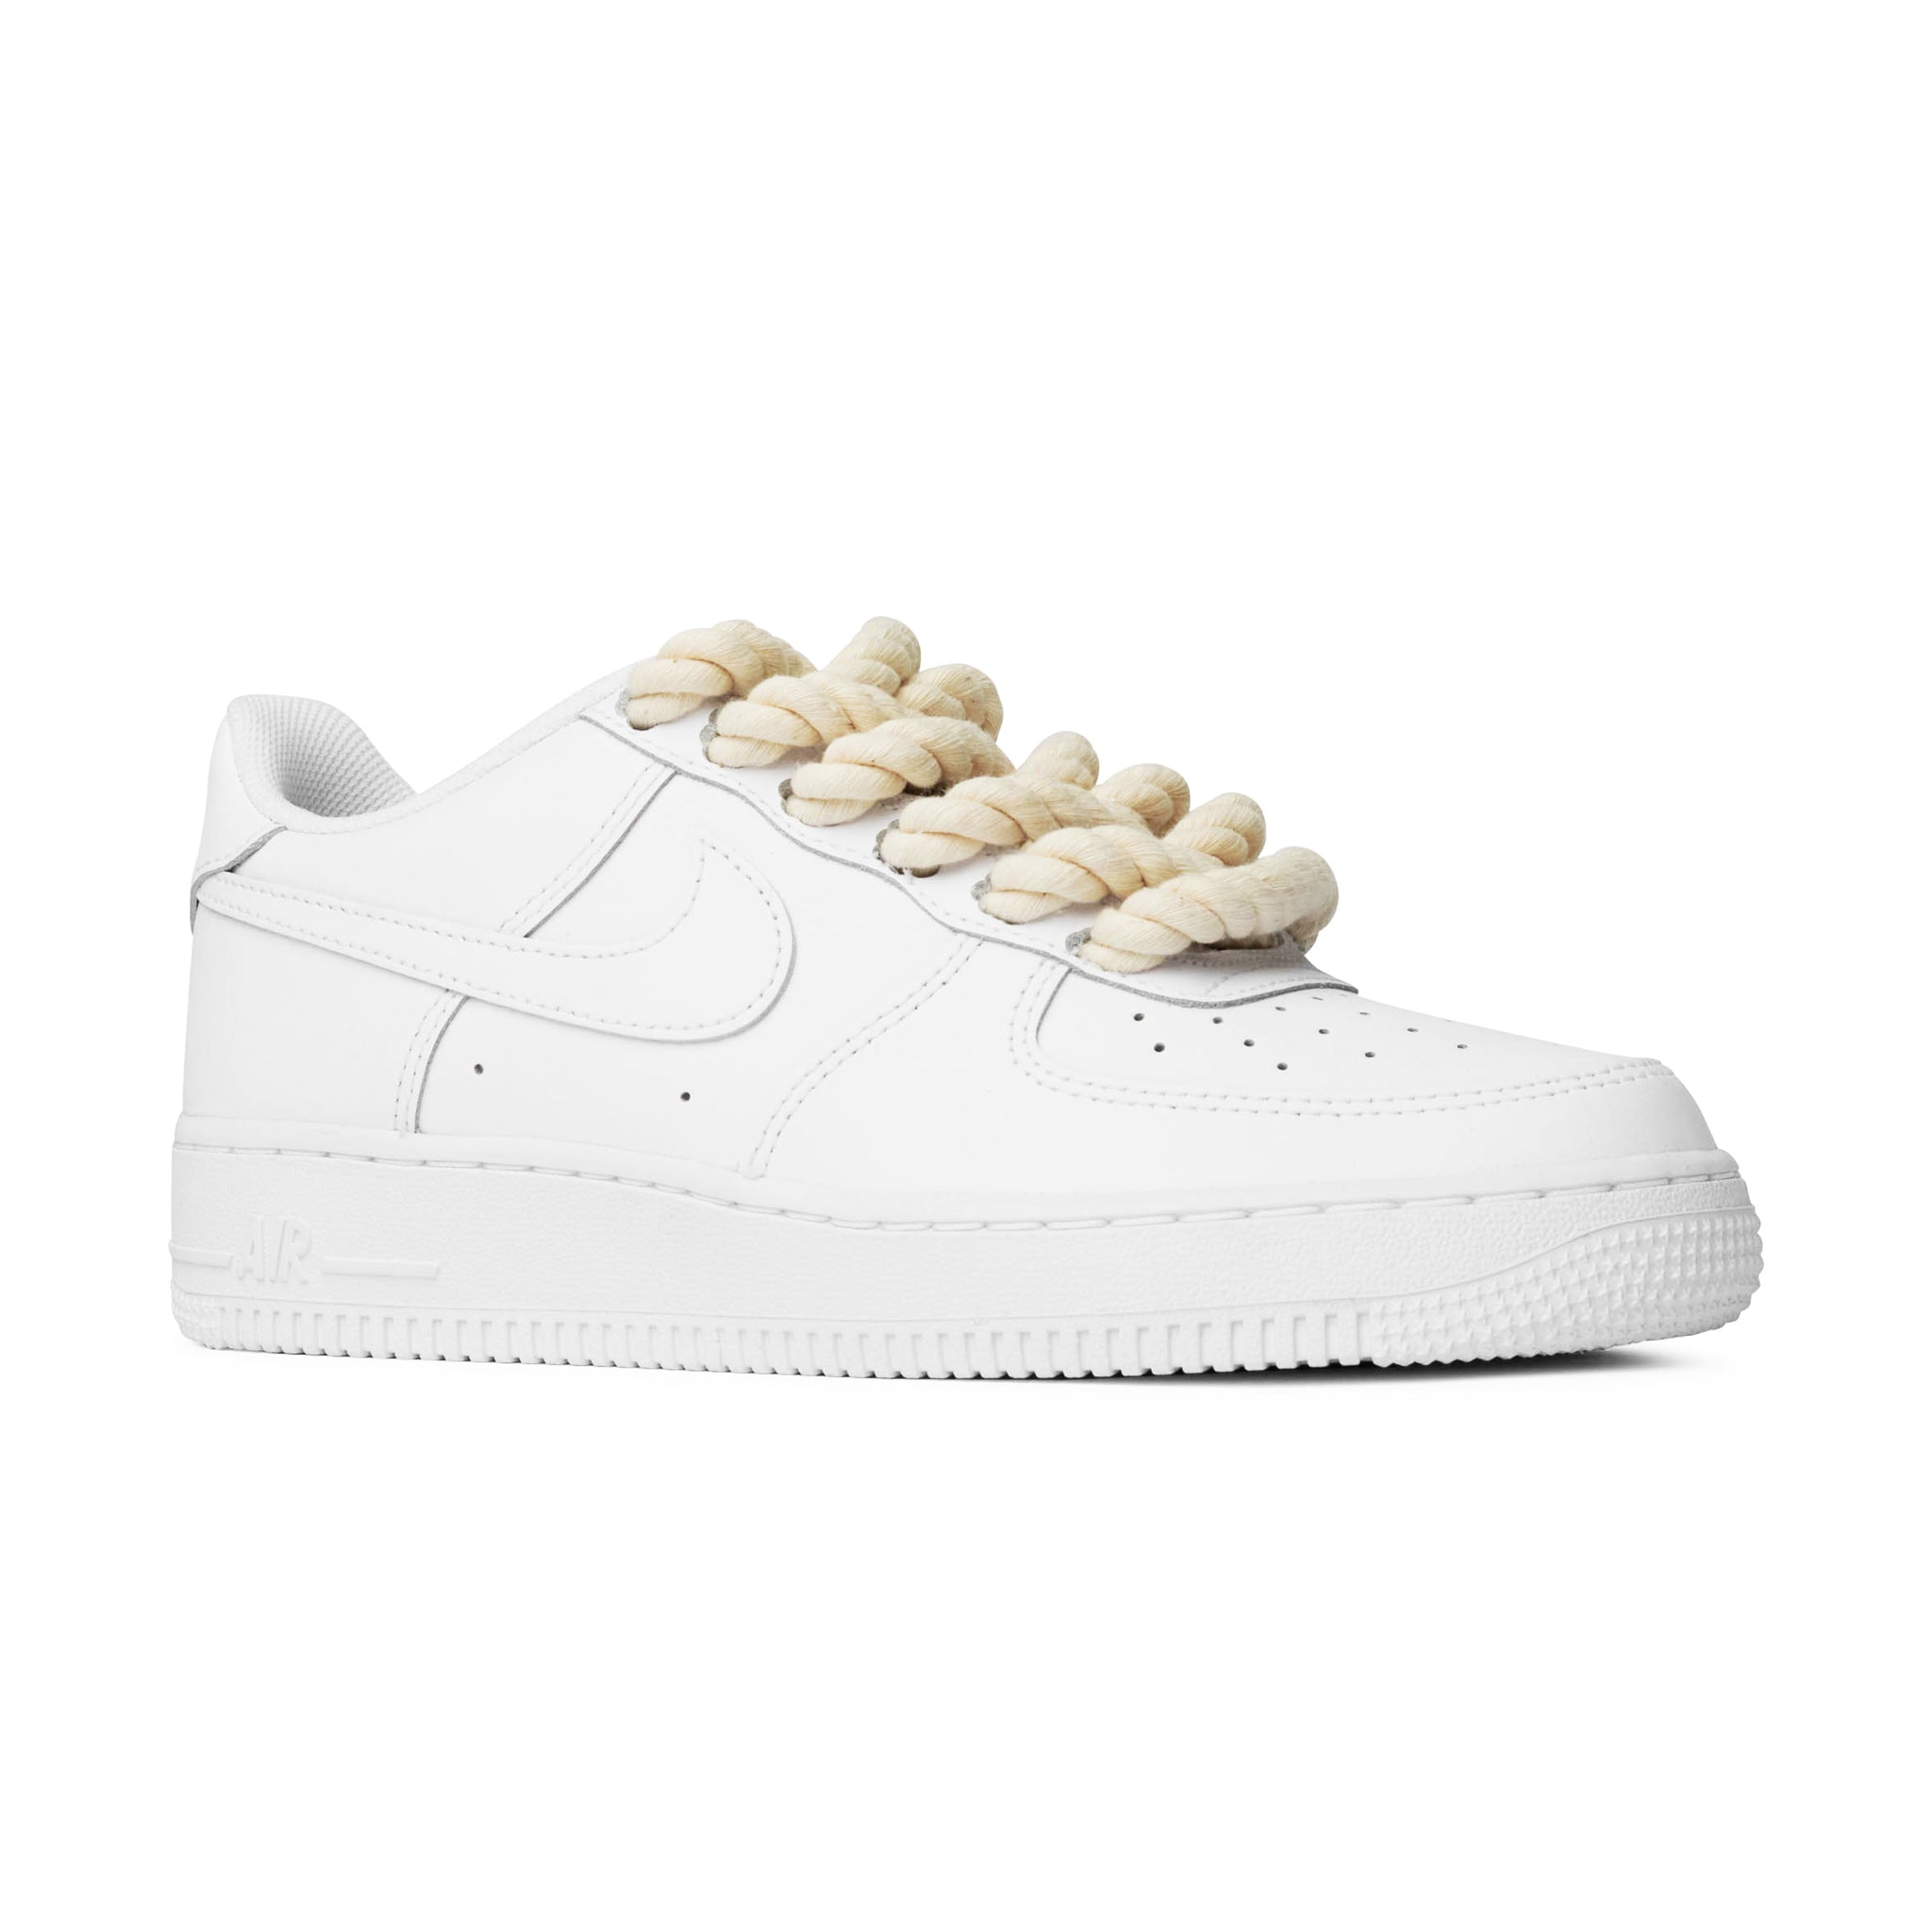 Front side view of Nike Air Force 1 Low Rope Lace White Cream (GS) 314192-117